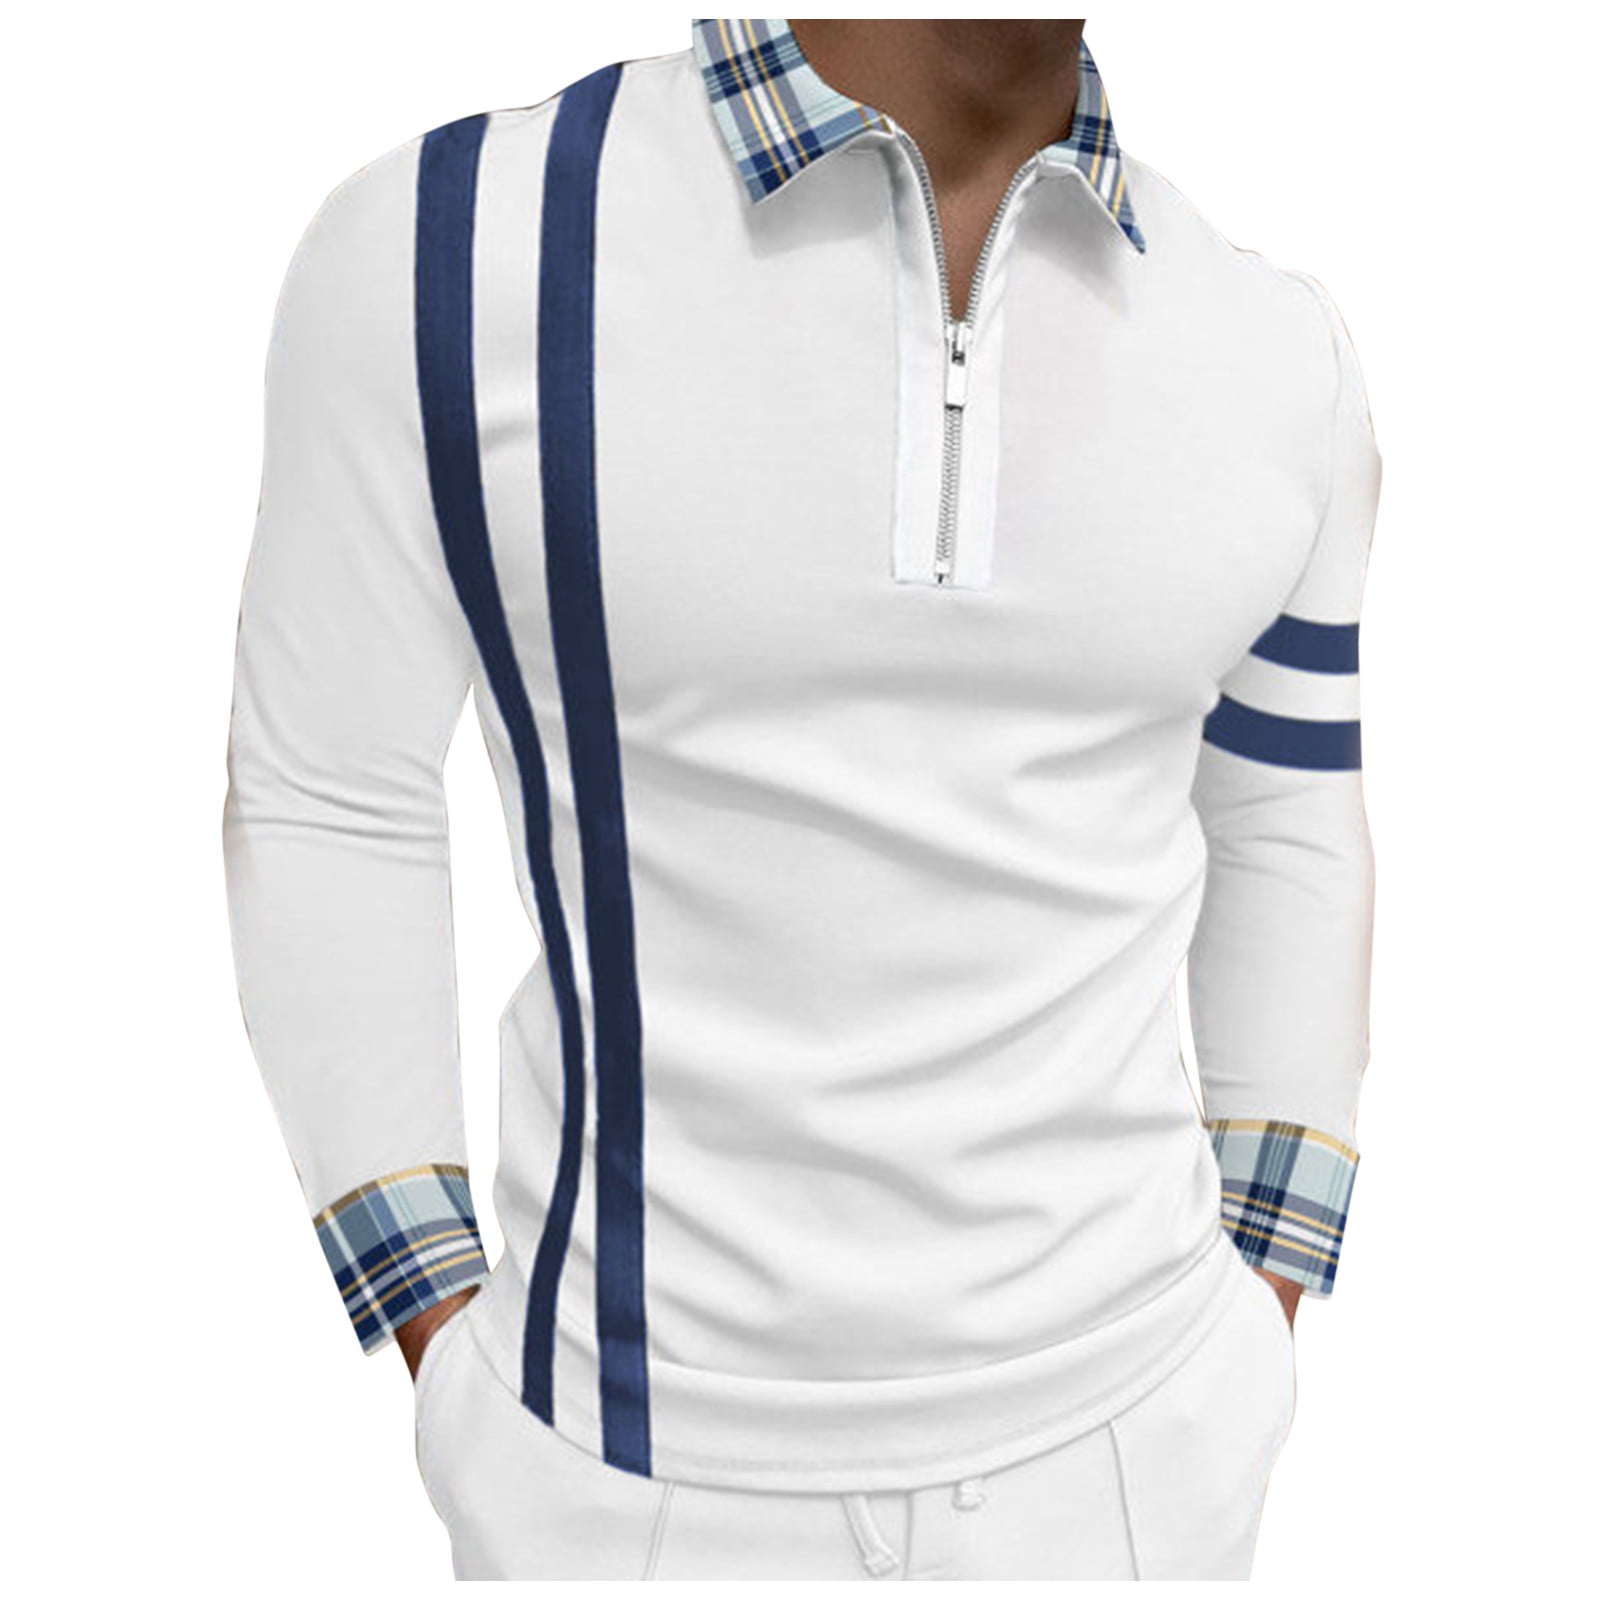 Ribbed Long Sleeve Polo Shirts Zip Up Dual Tipped Collar T Shirts Casual Summer Solid Soft Cotton Tees Tops - Walmart.com